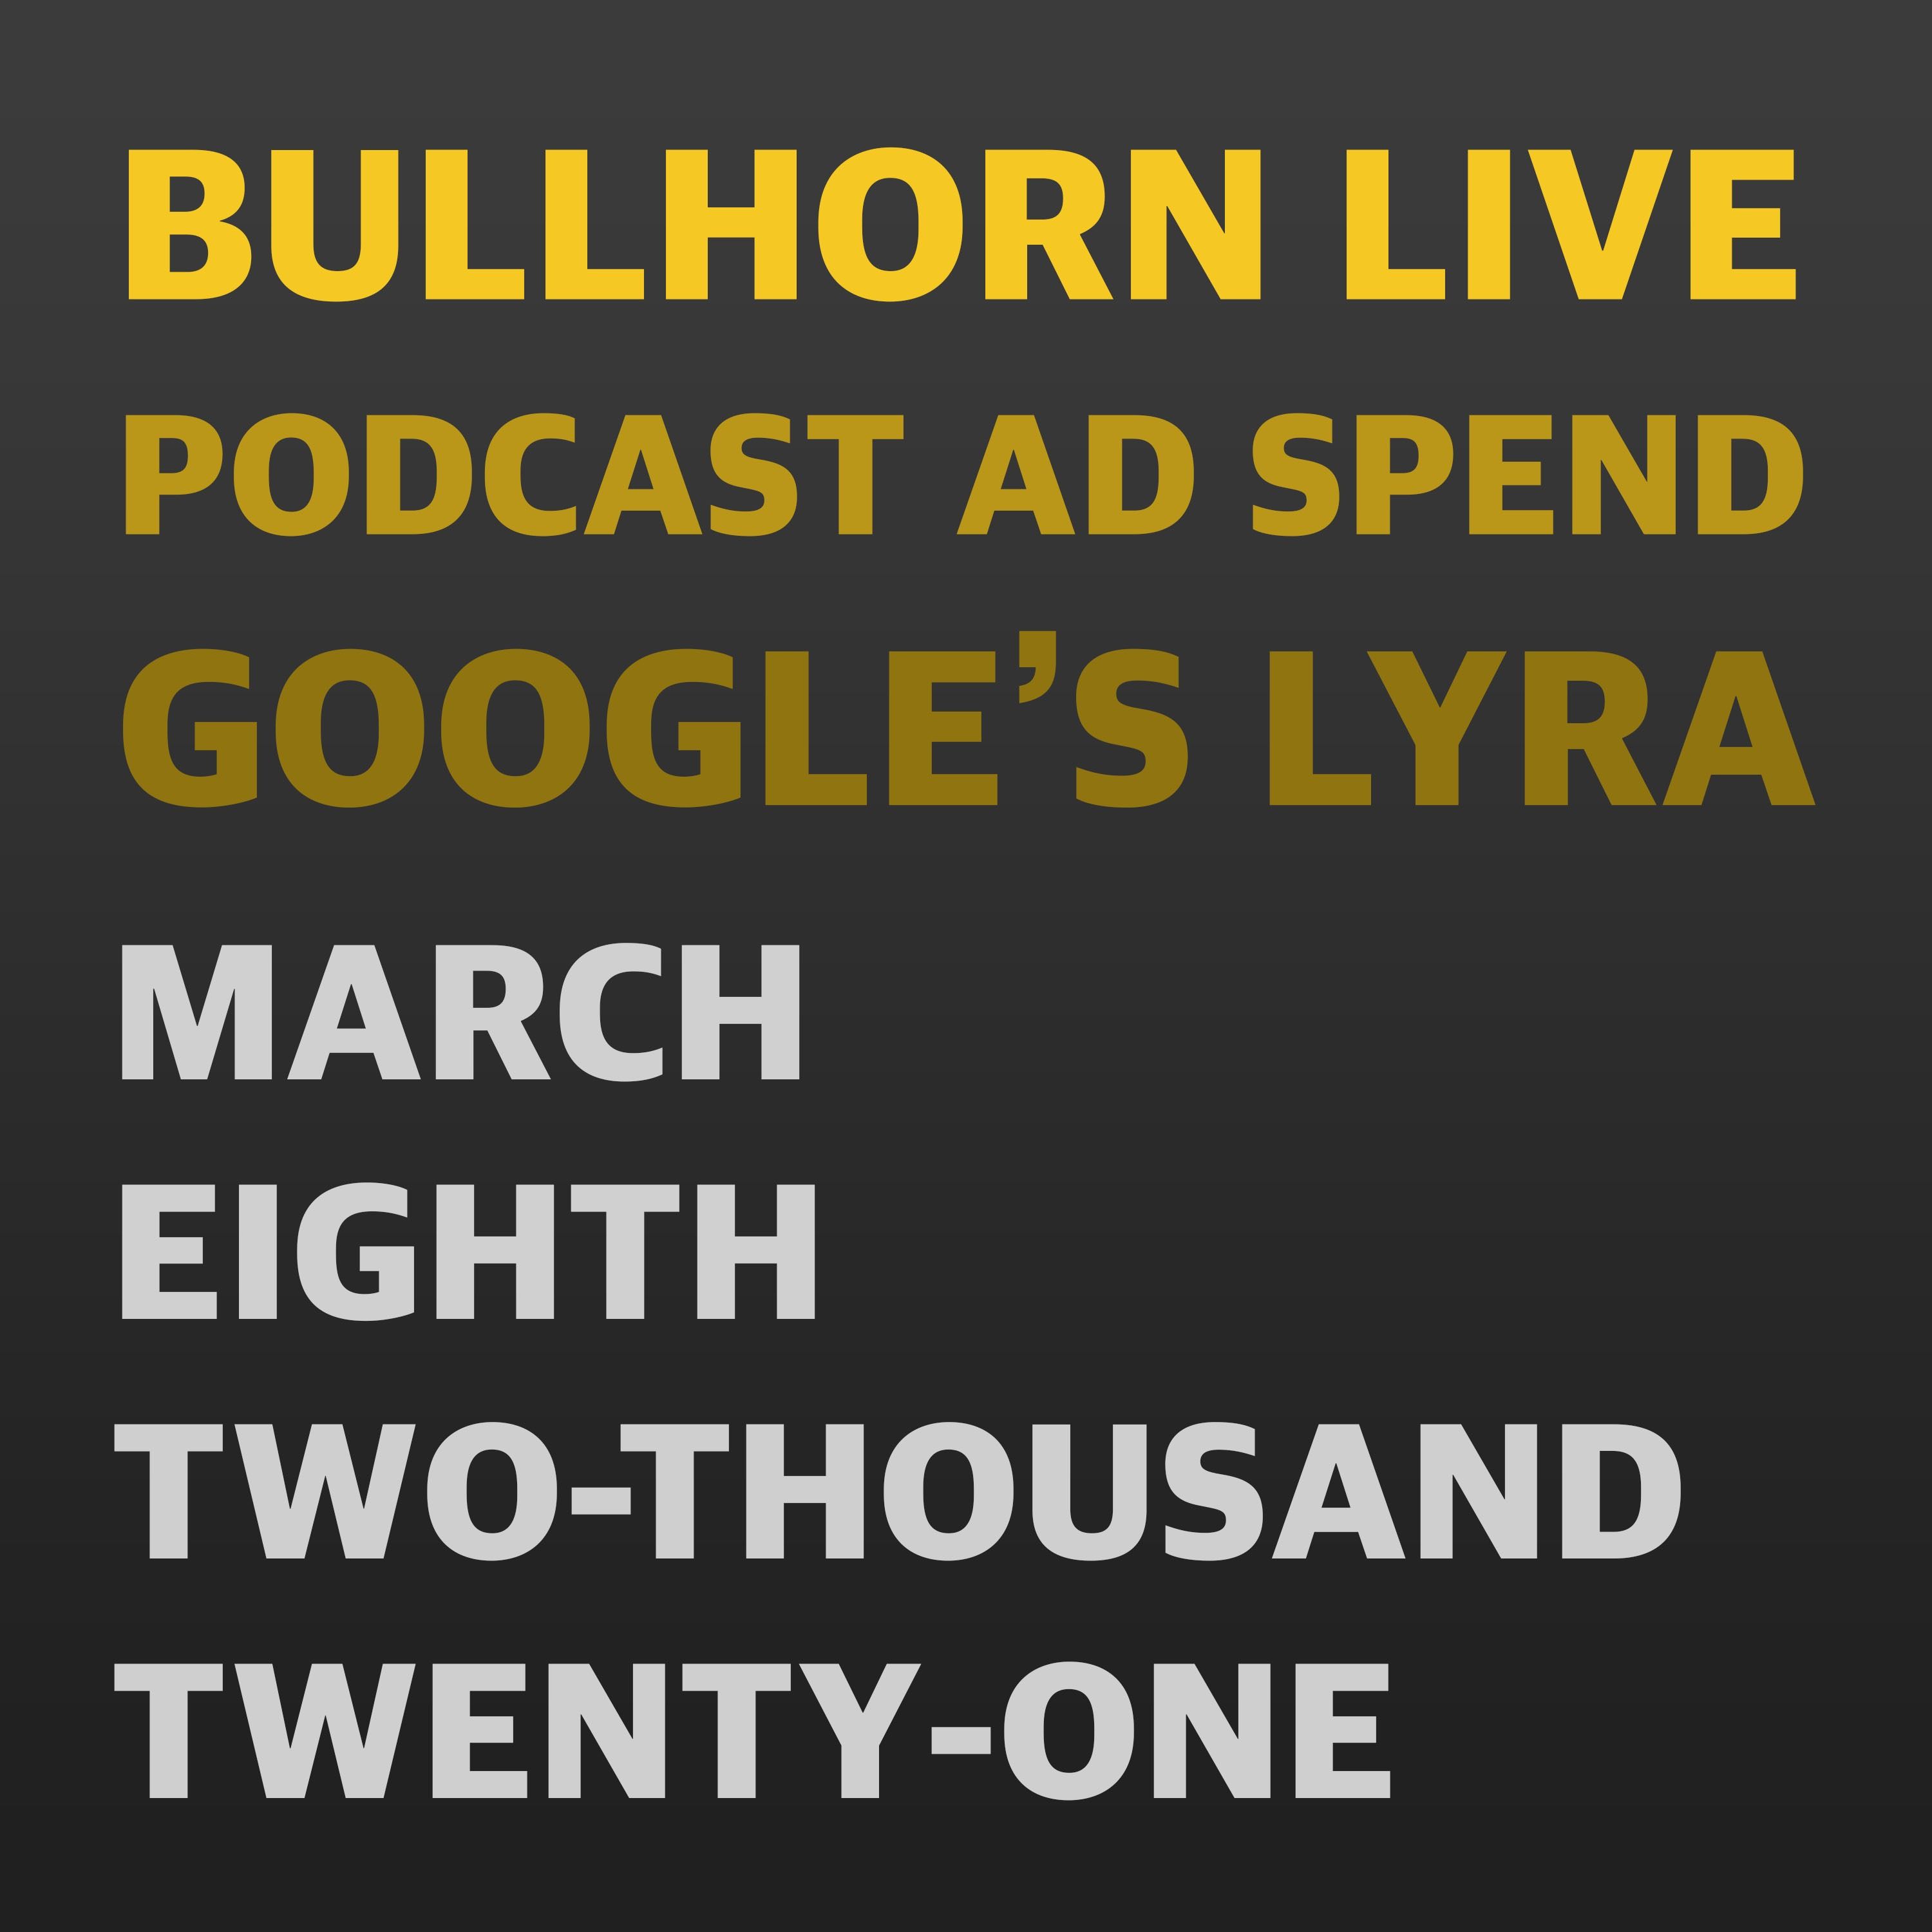 Bullhorn Live, Podcast Ad Spend, and Google's Lyra